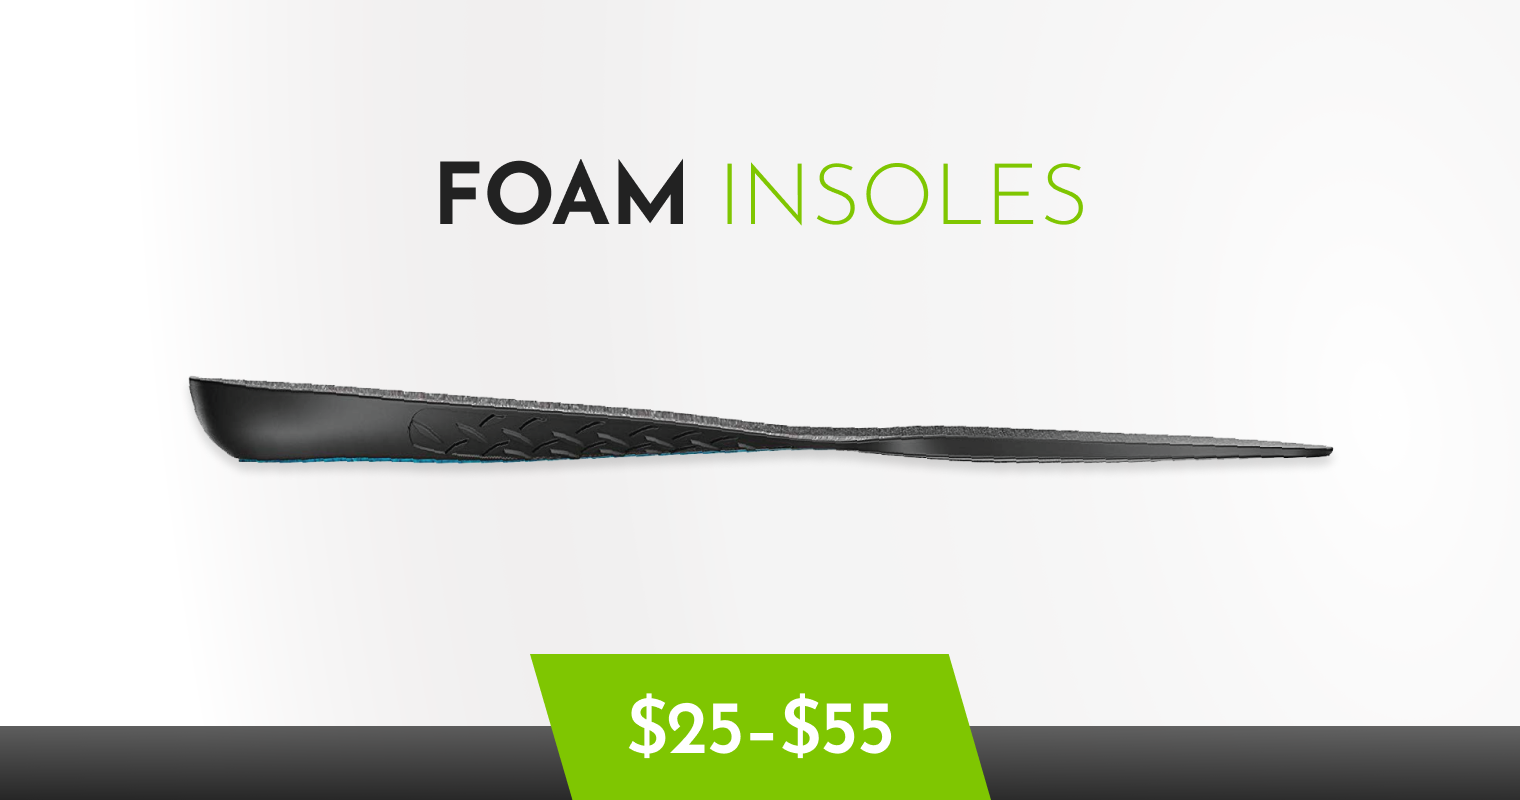 Orthotic insole cost foam insoles